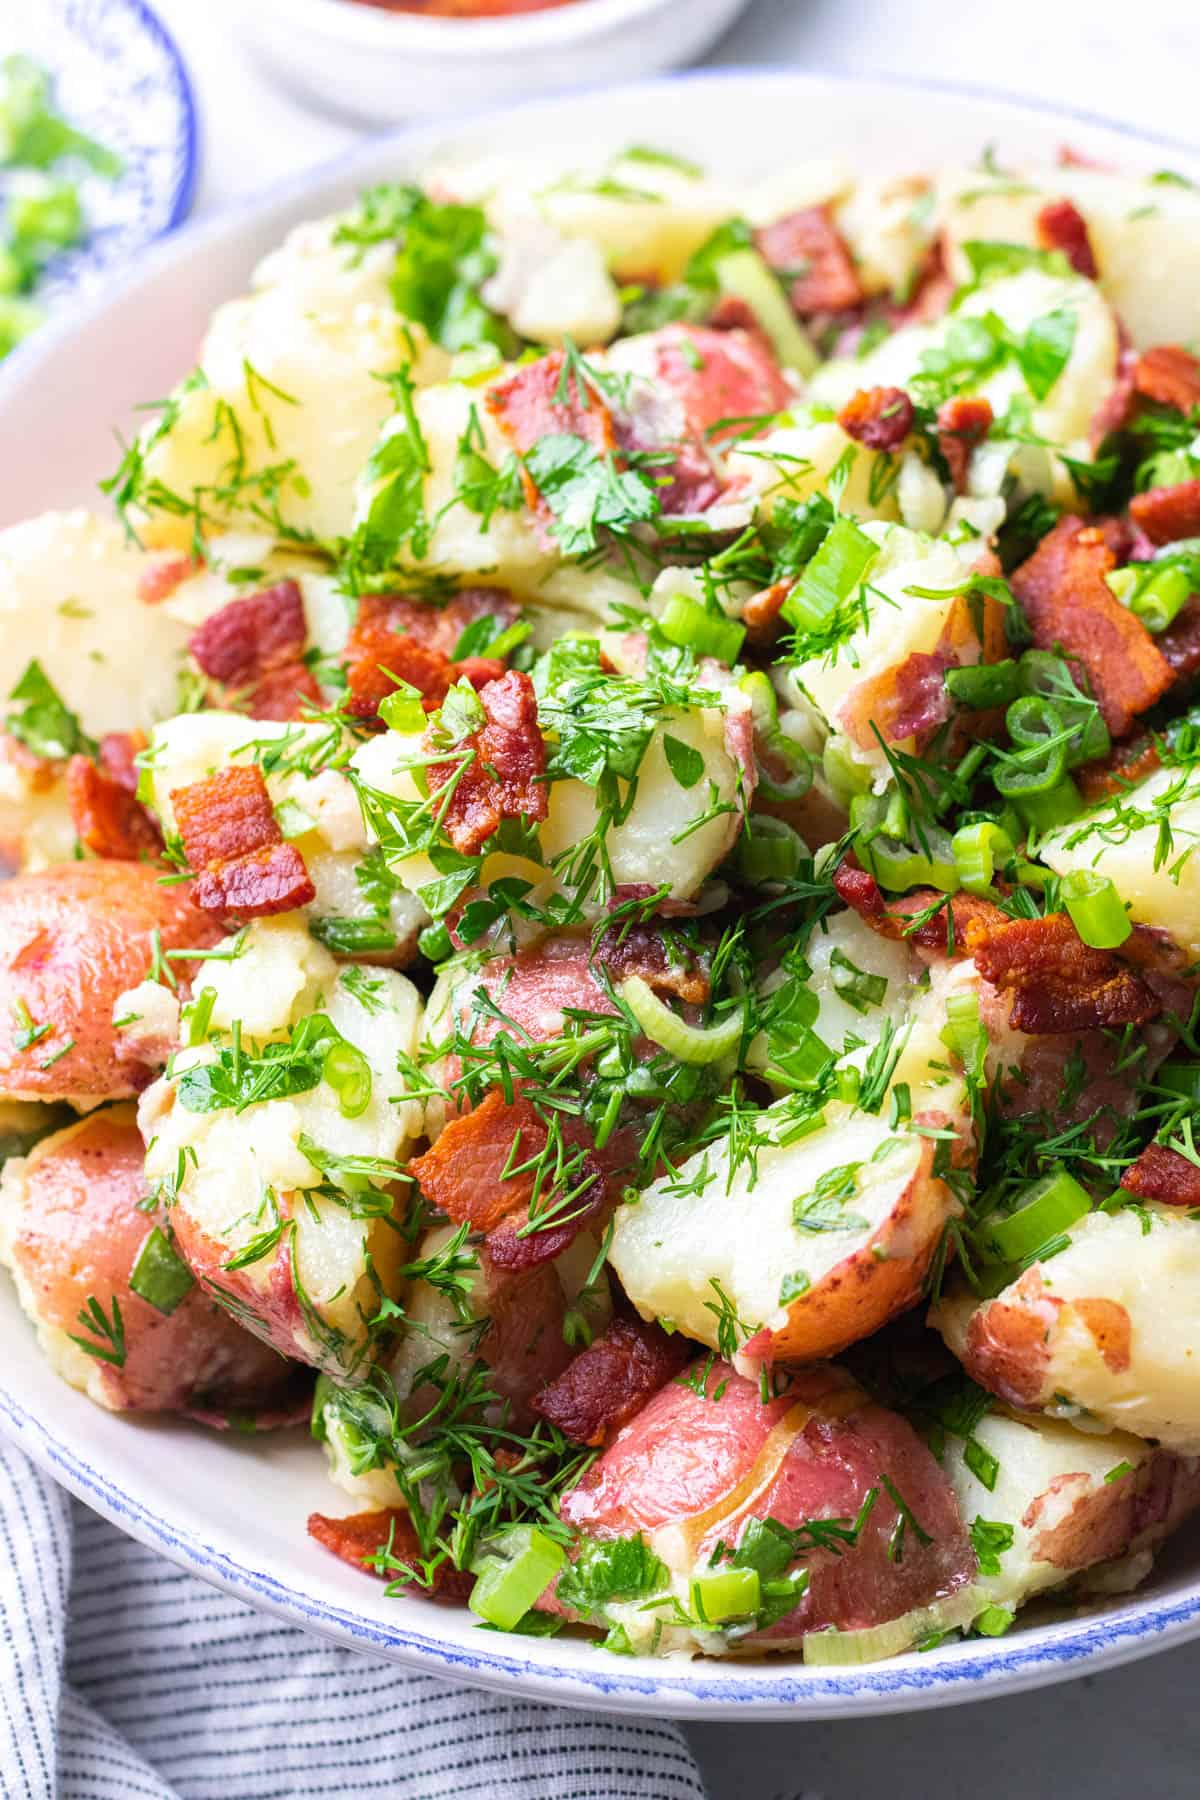 Red potato salad with dill and chopped bacon in a bowl.